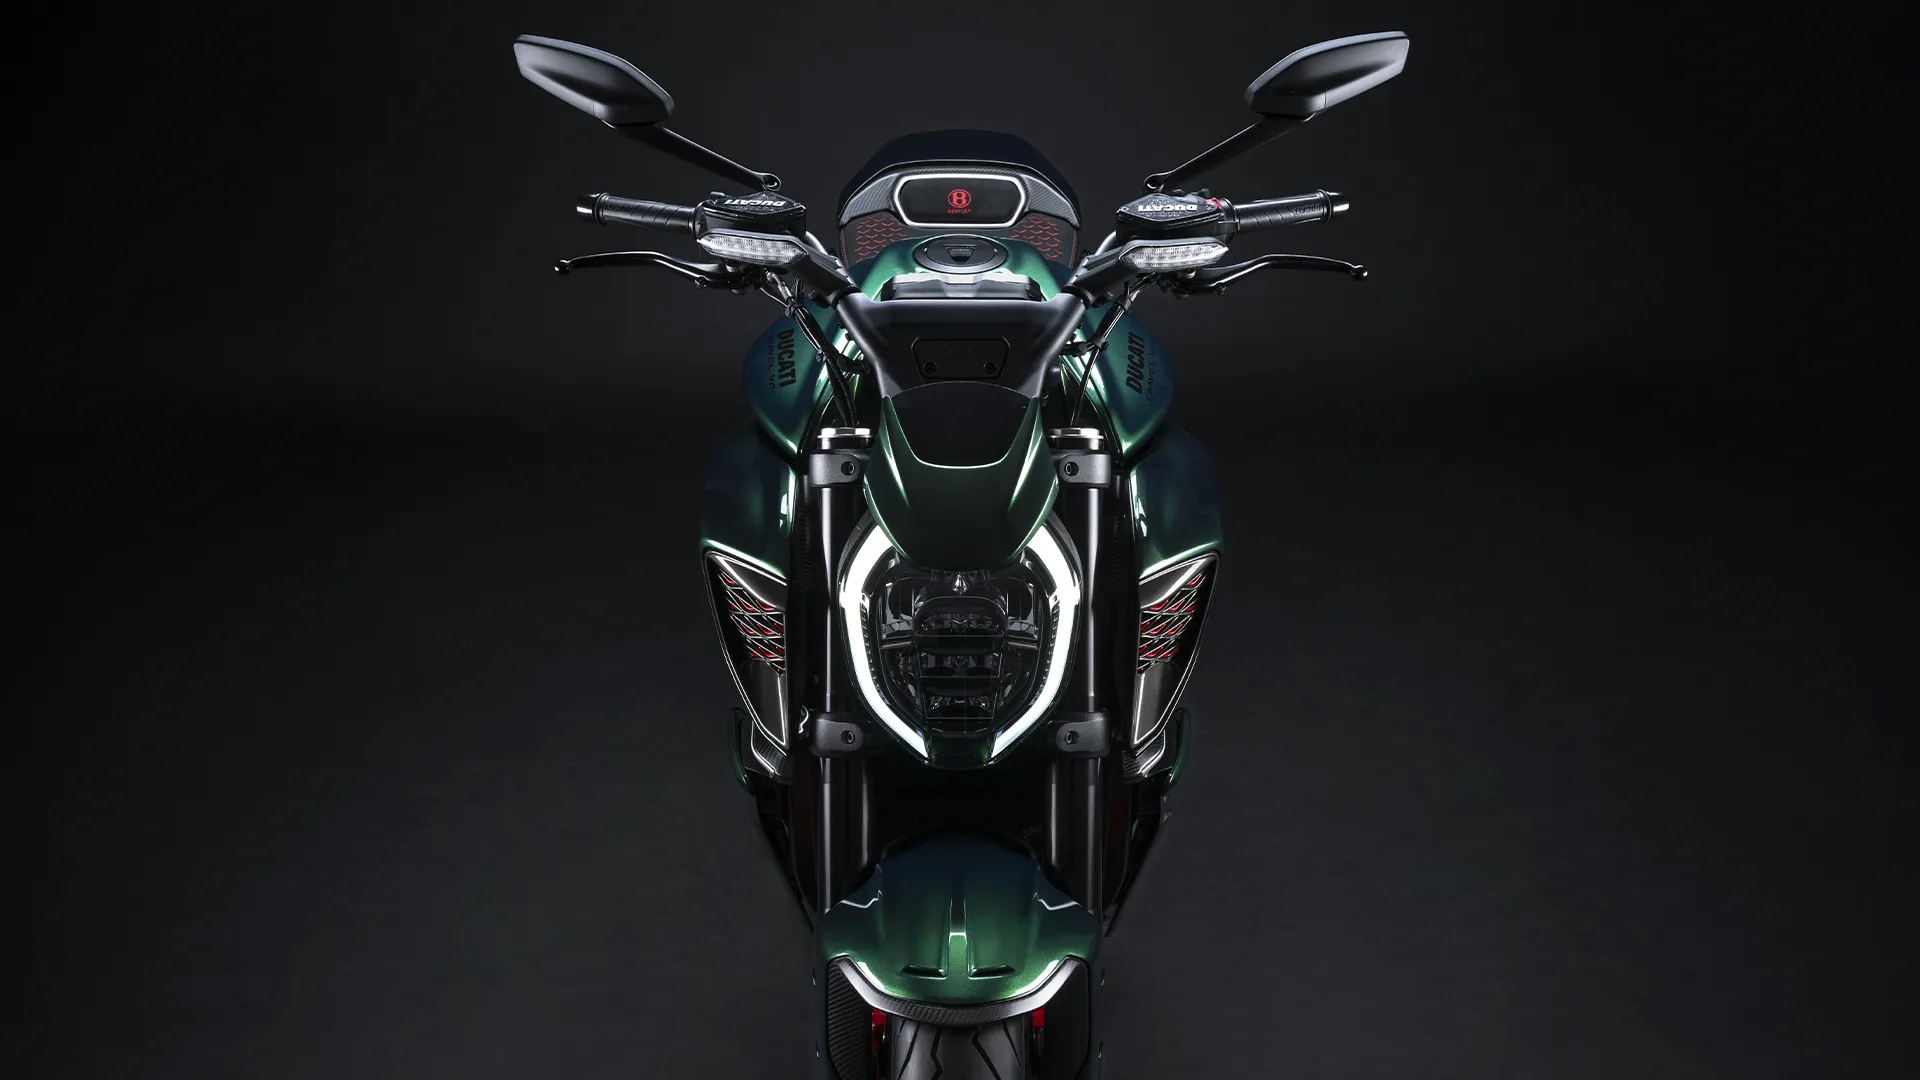 Ducati-Diavel-V4-for-Bentley-DWP24-Overview-gallery-1920x1080-01 (1)